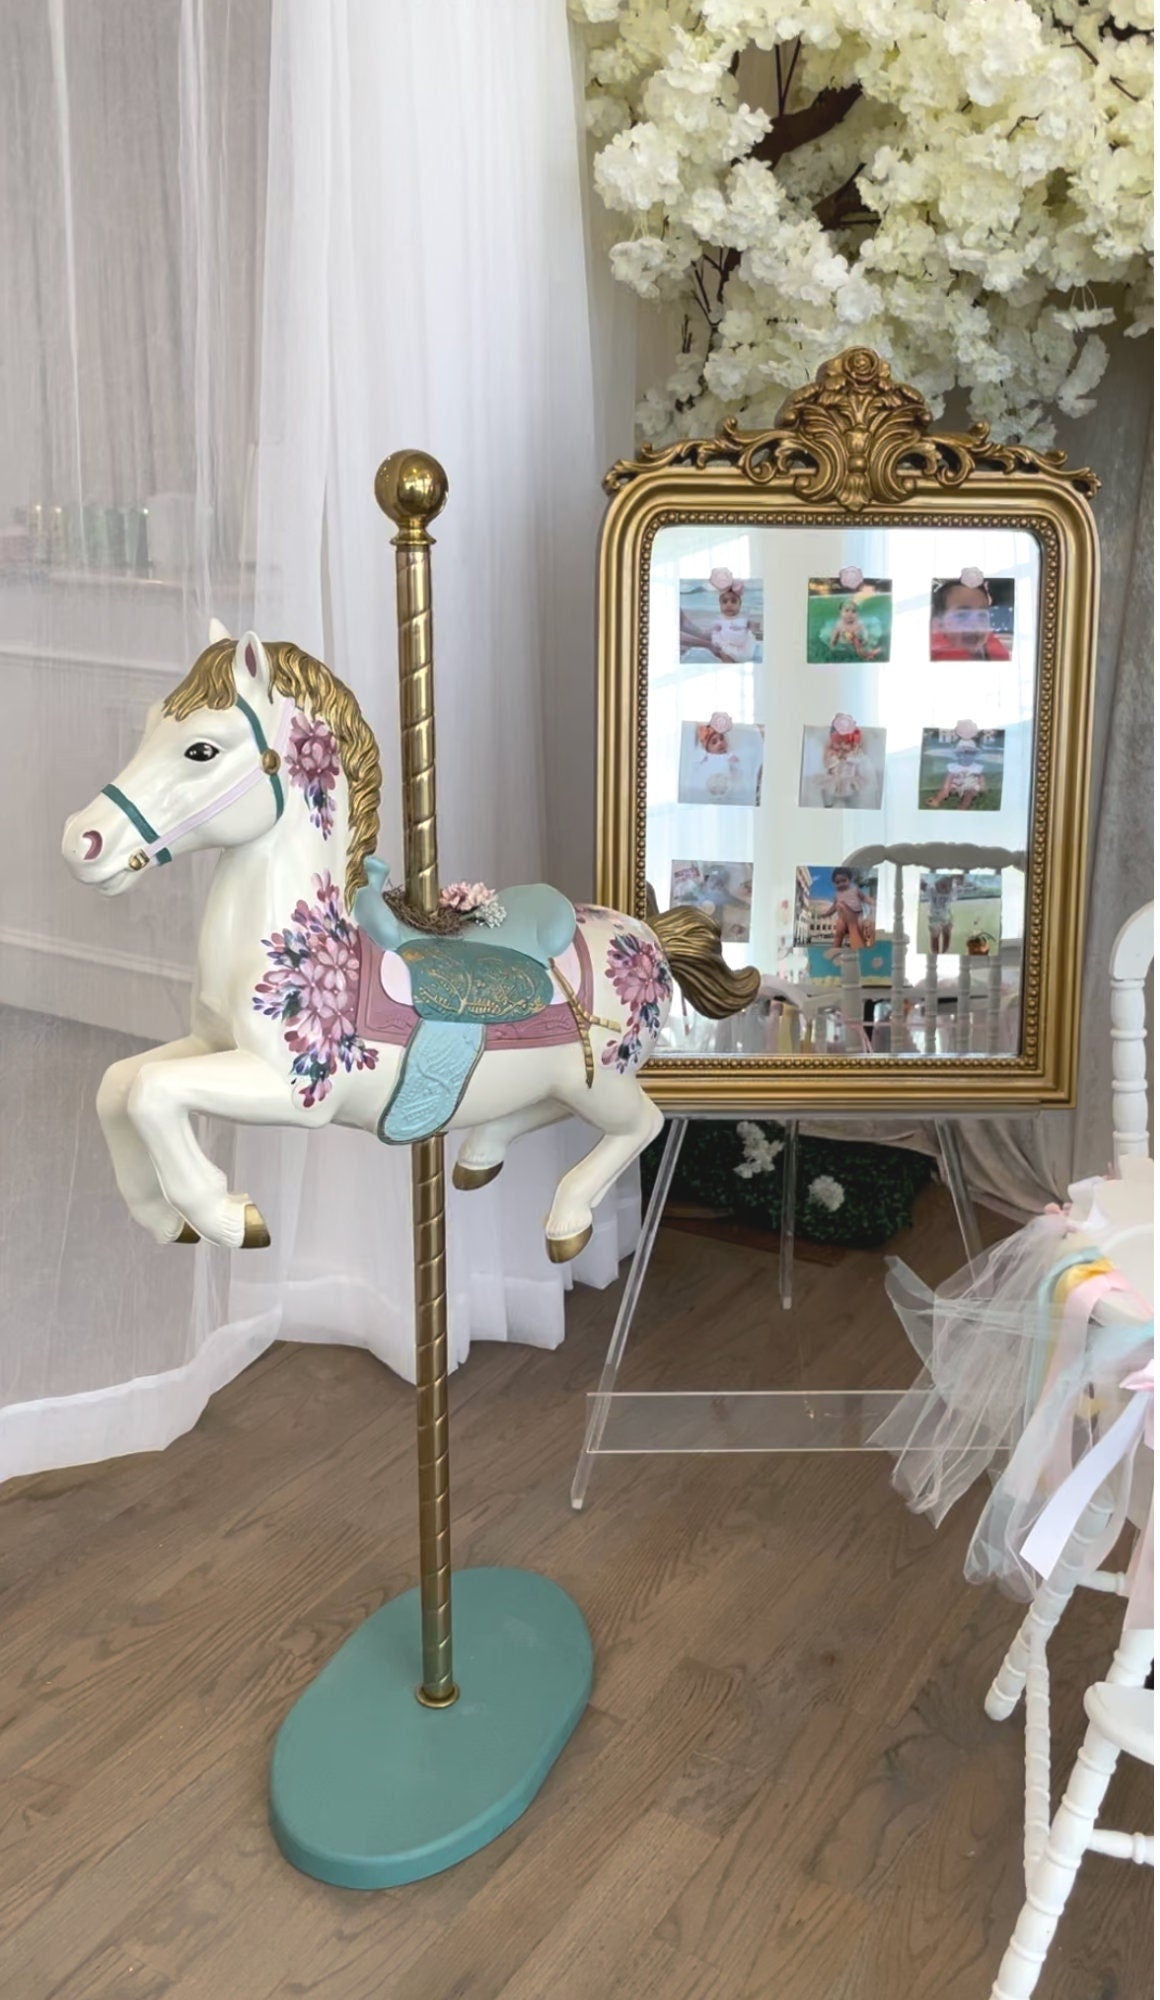 Life Size Carousel Horse For Rent